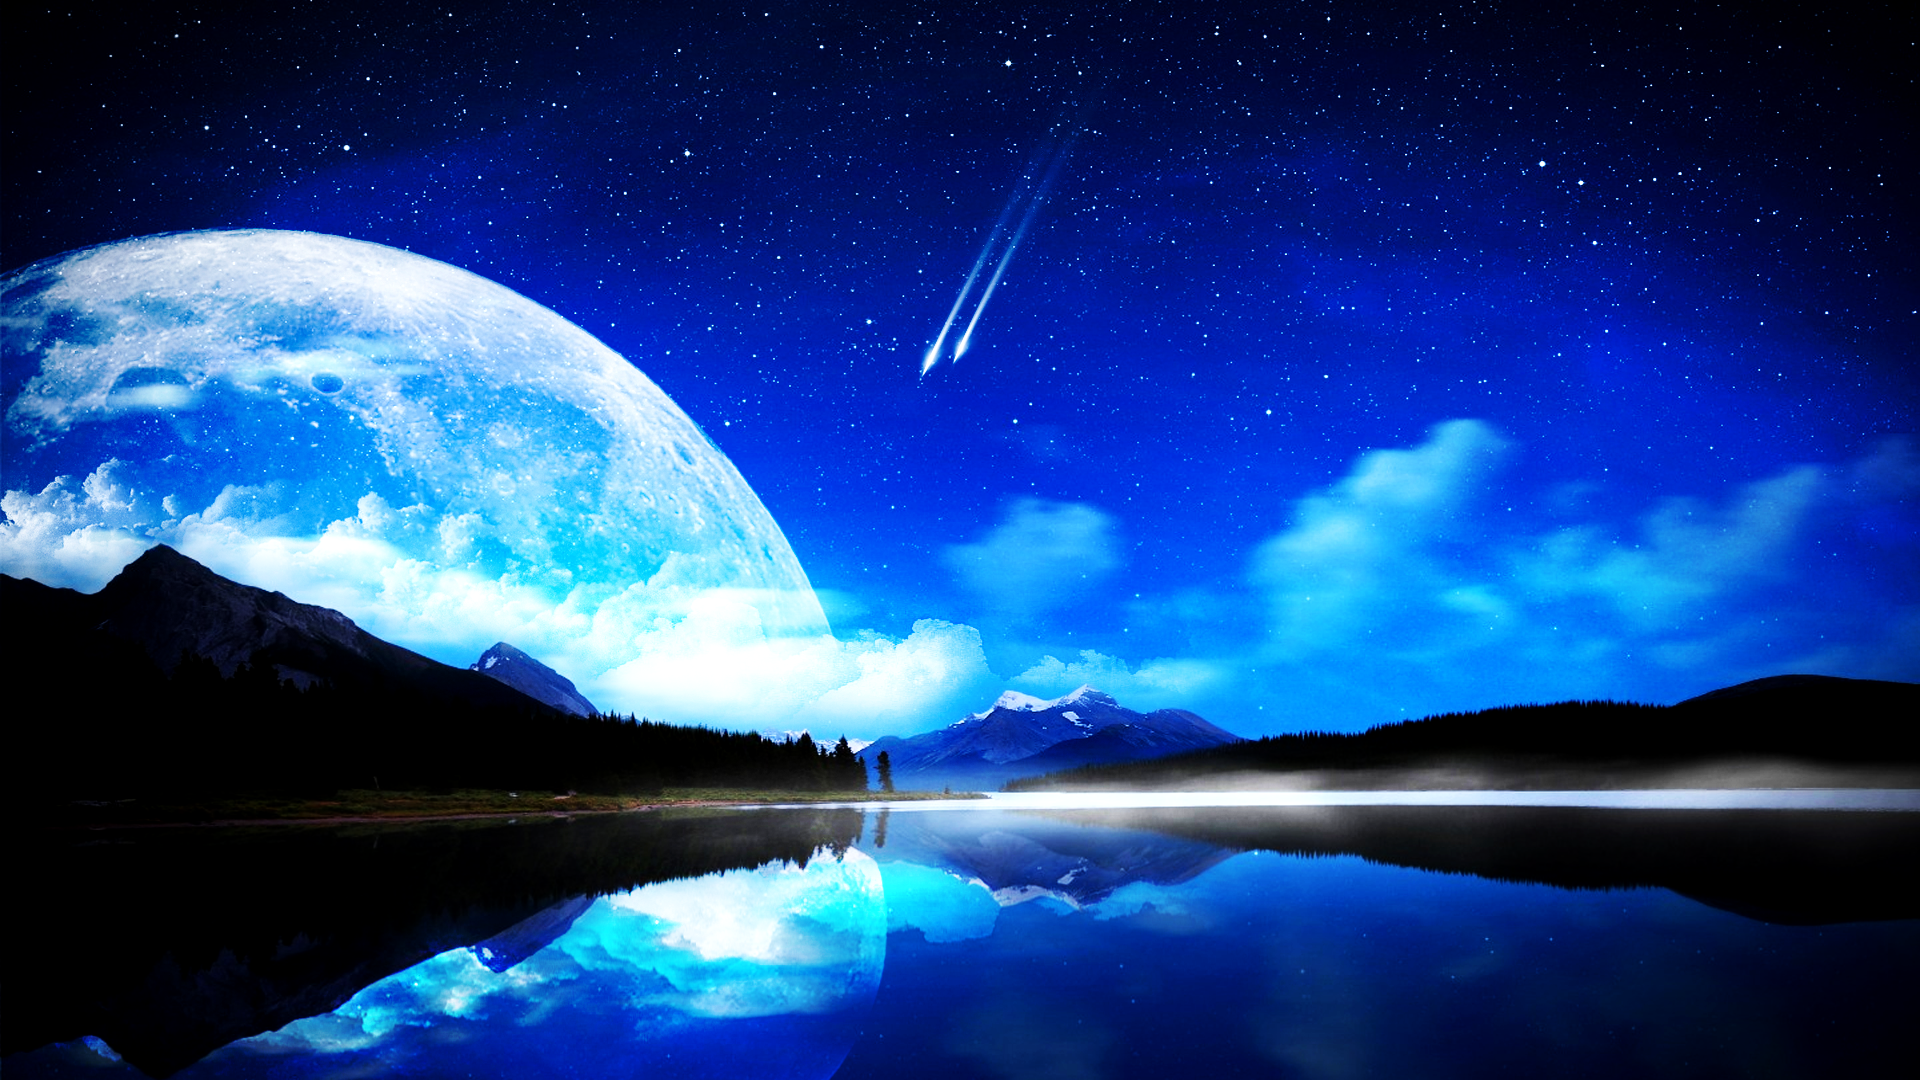 Crescent Moon Wallpapers, Awesome Crescent Moon Image, #17808